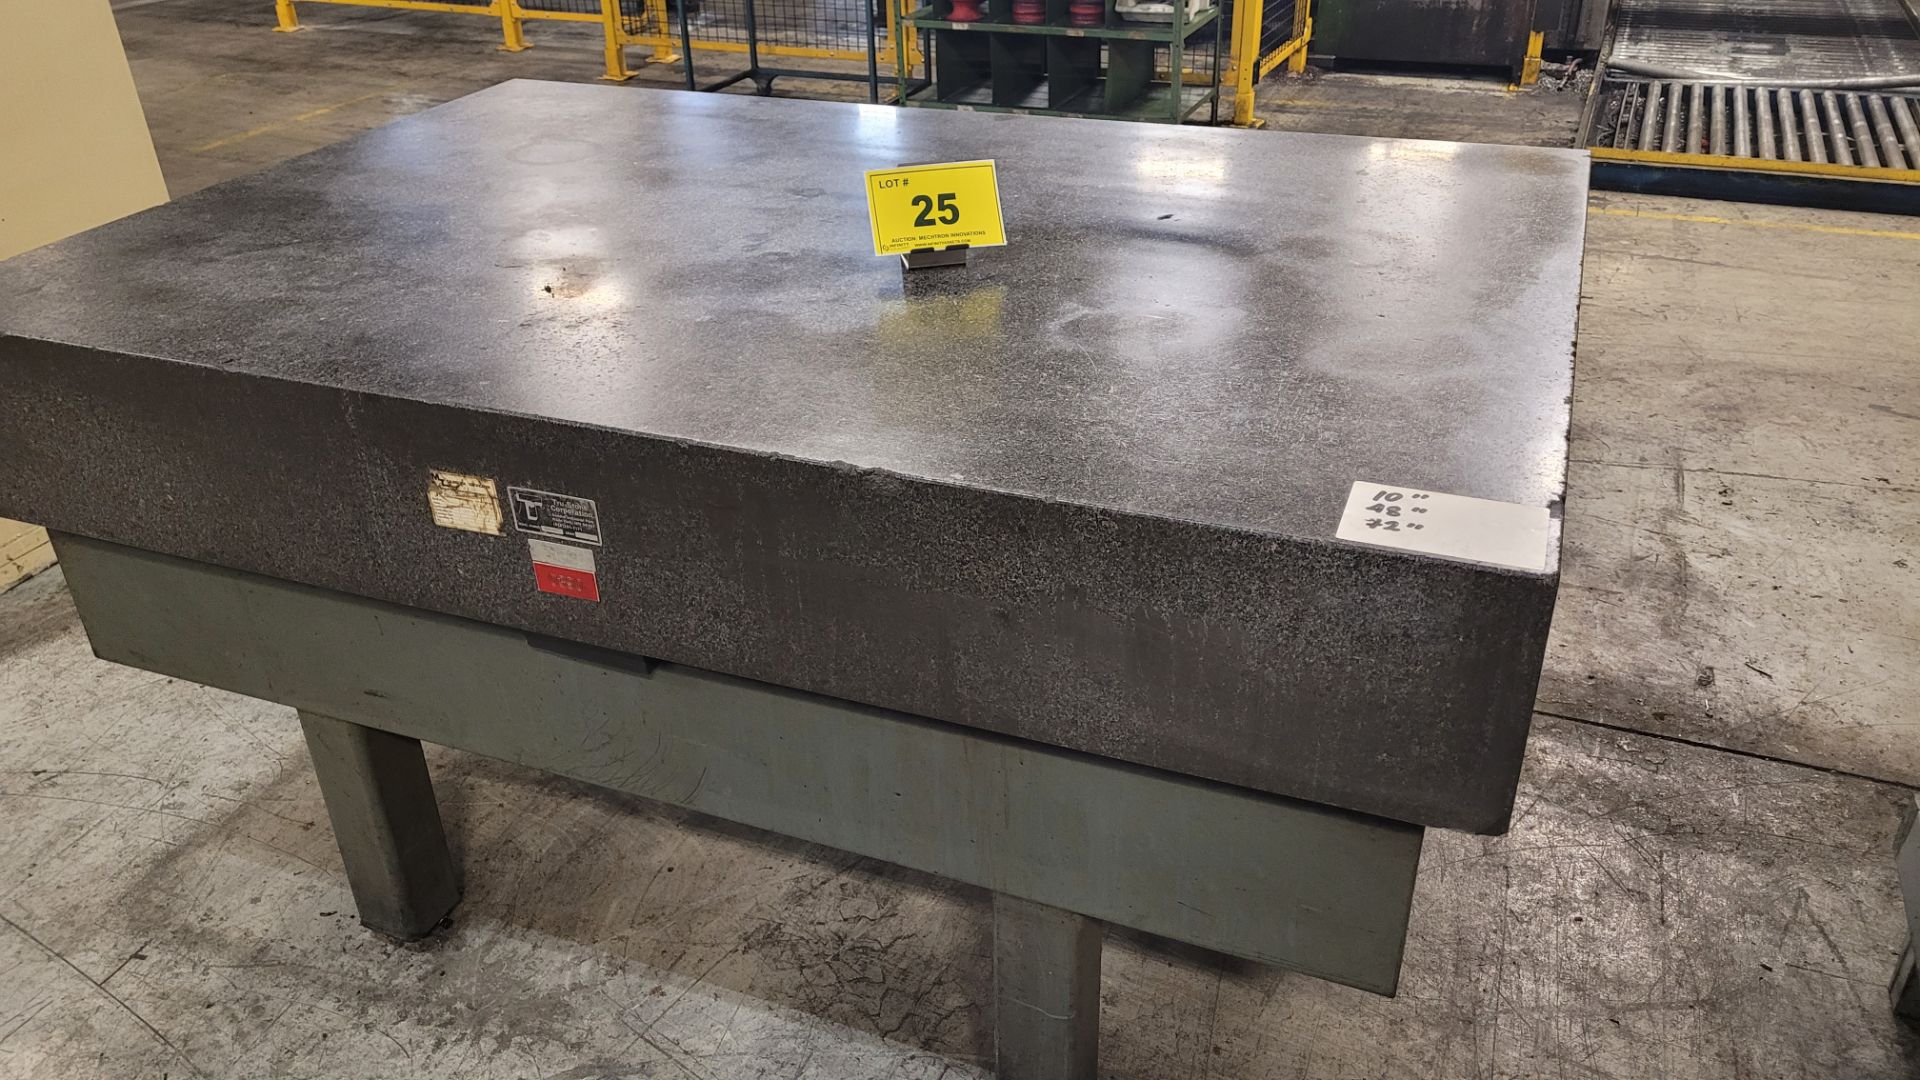 TRU-STONE CORPORATION APPROX. 10" X 48" X 72" GRANITE SURFACE PLATE ON STAND (RIGGING FEE $45)